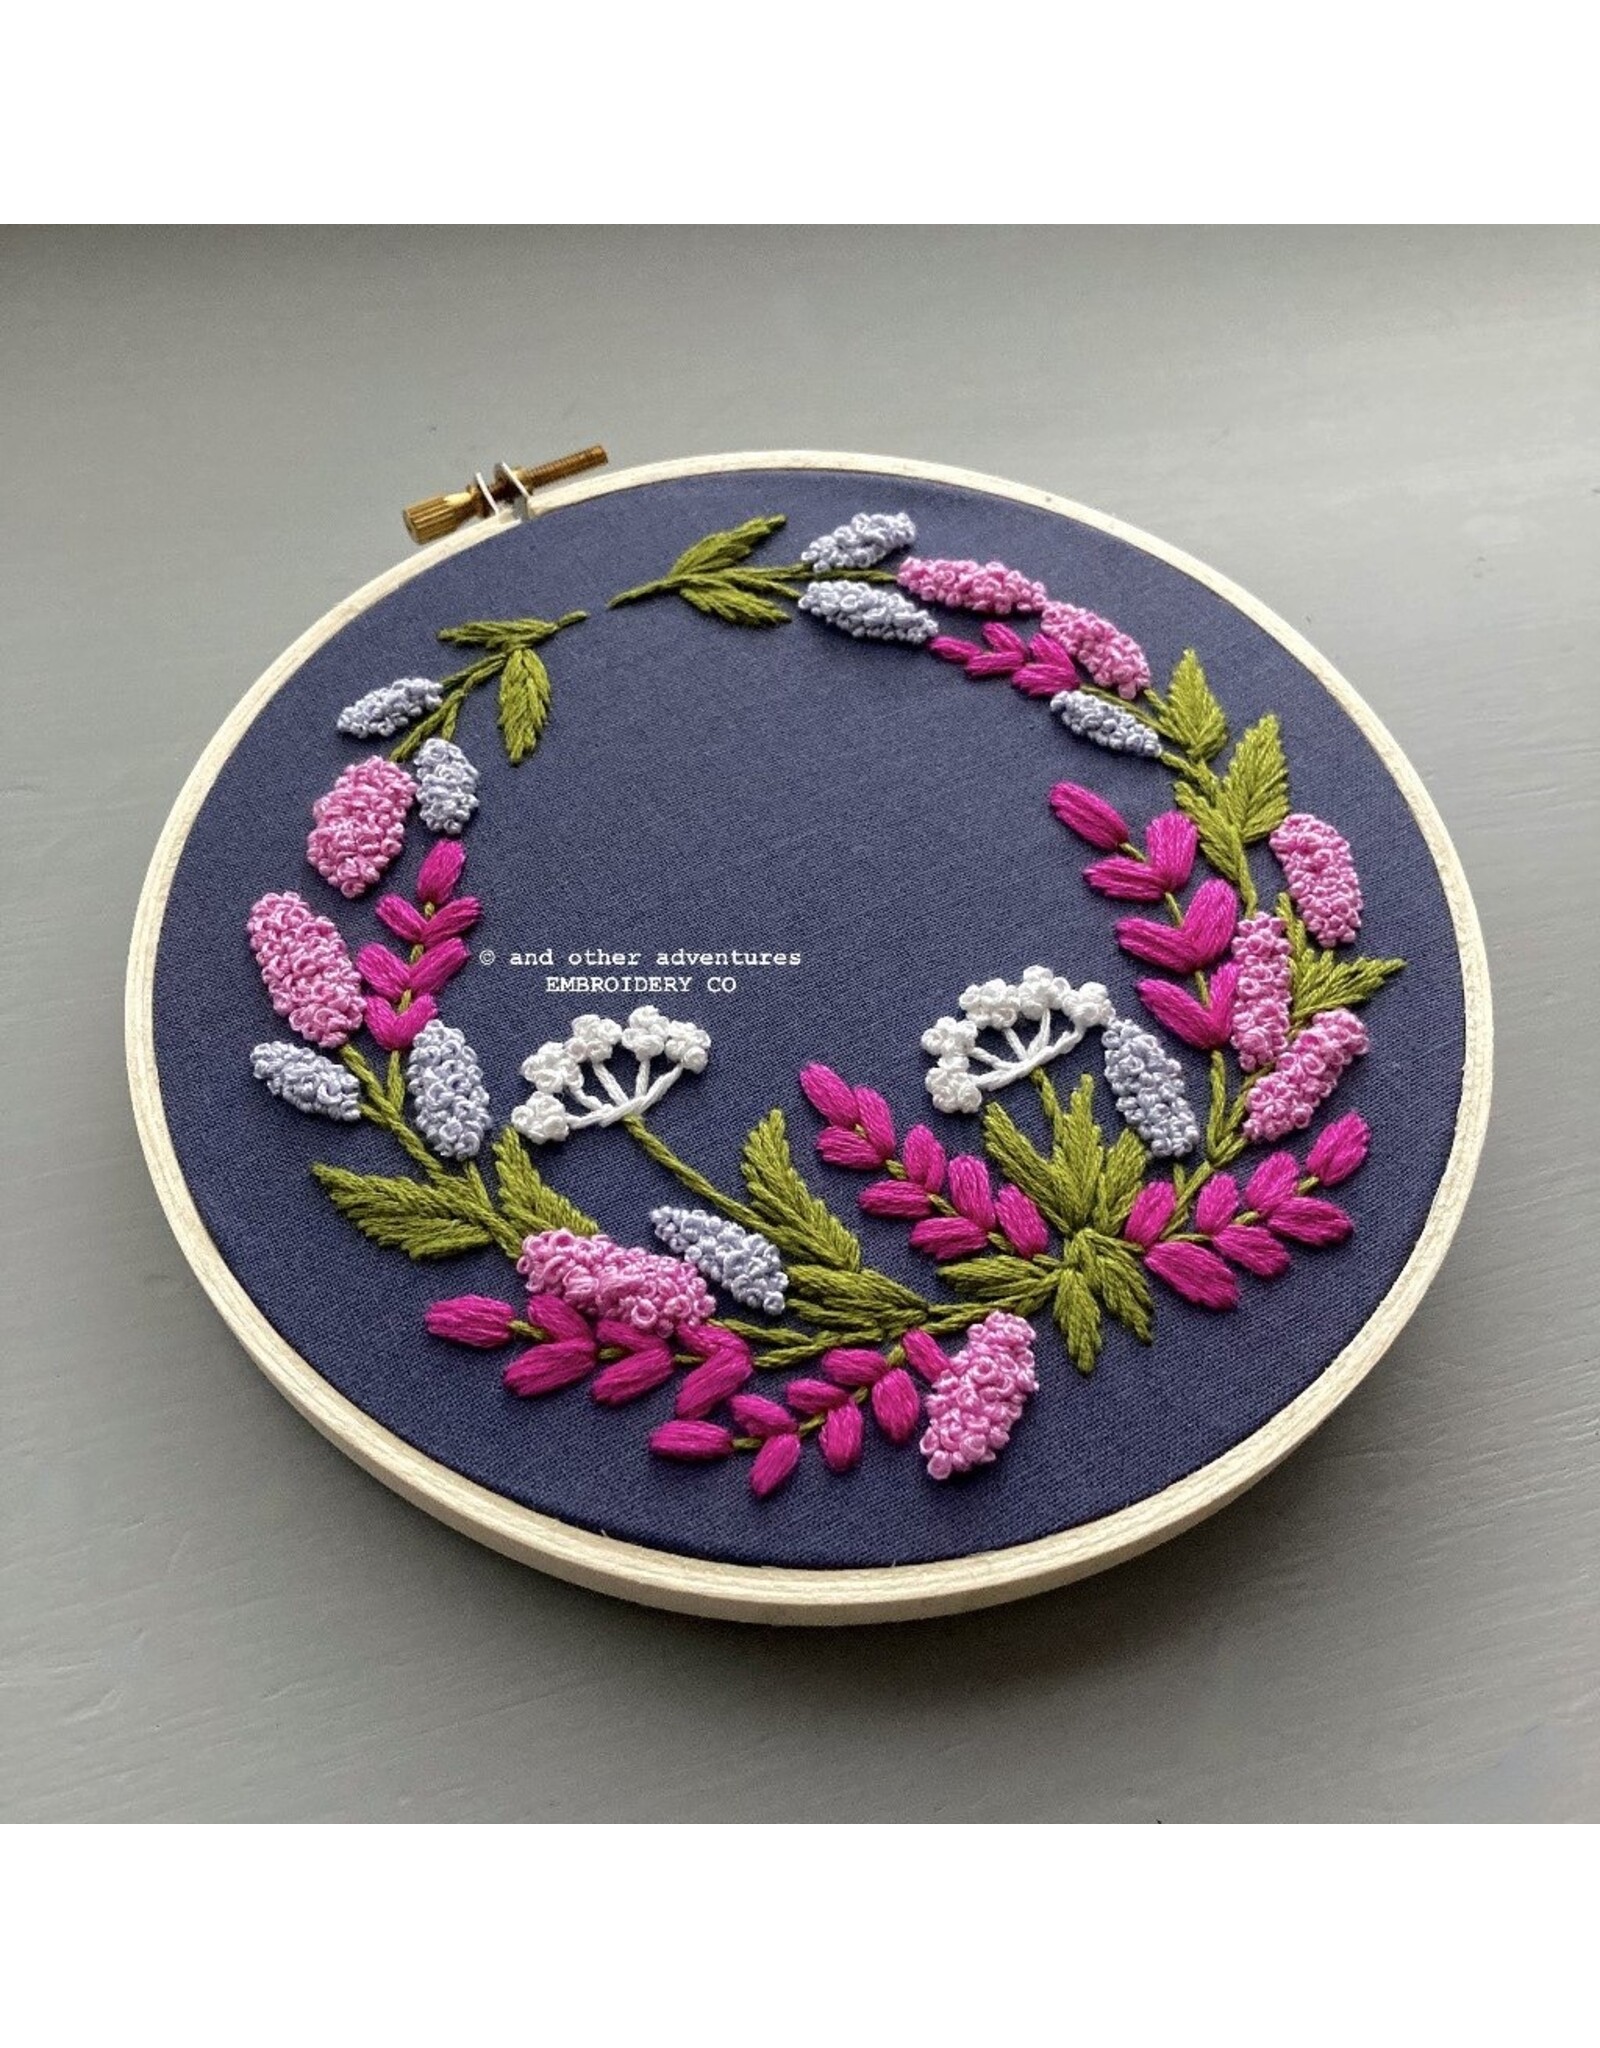 And Other Adventures Embroidery Co. Kensington in Periwinkle, Beginner Embroidery Kit